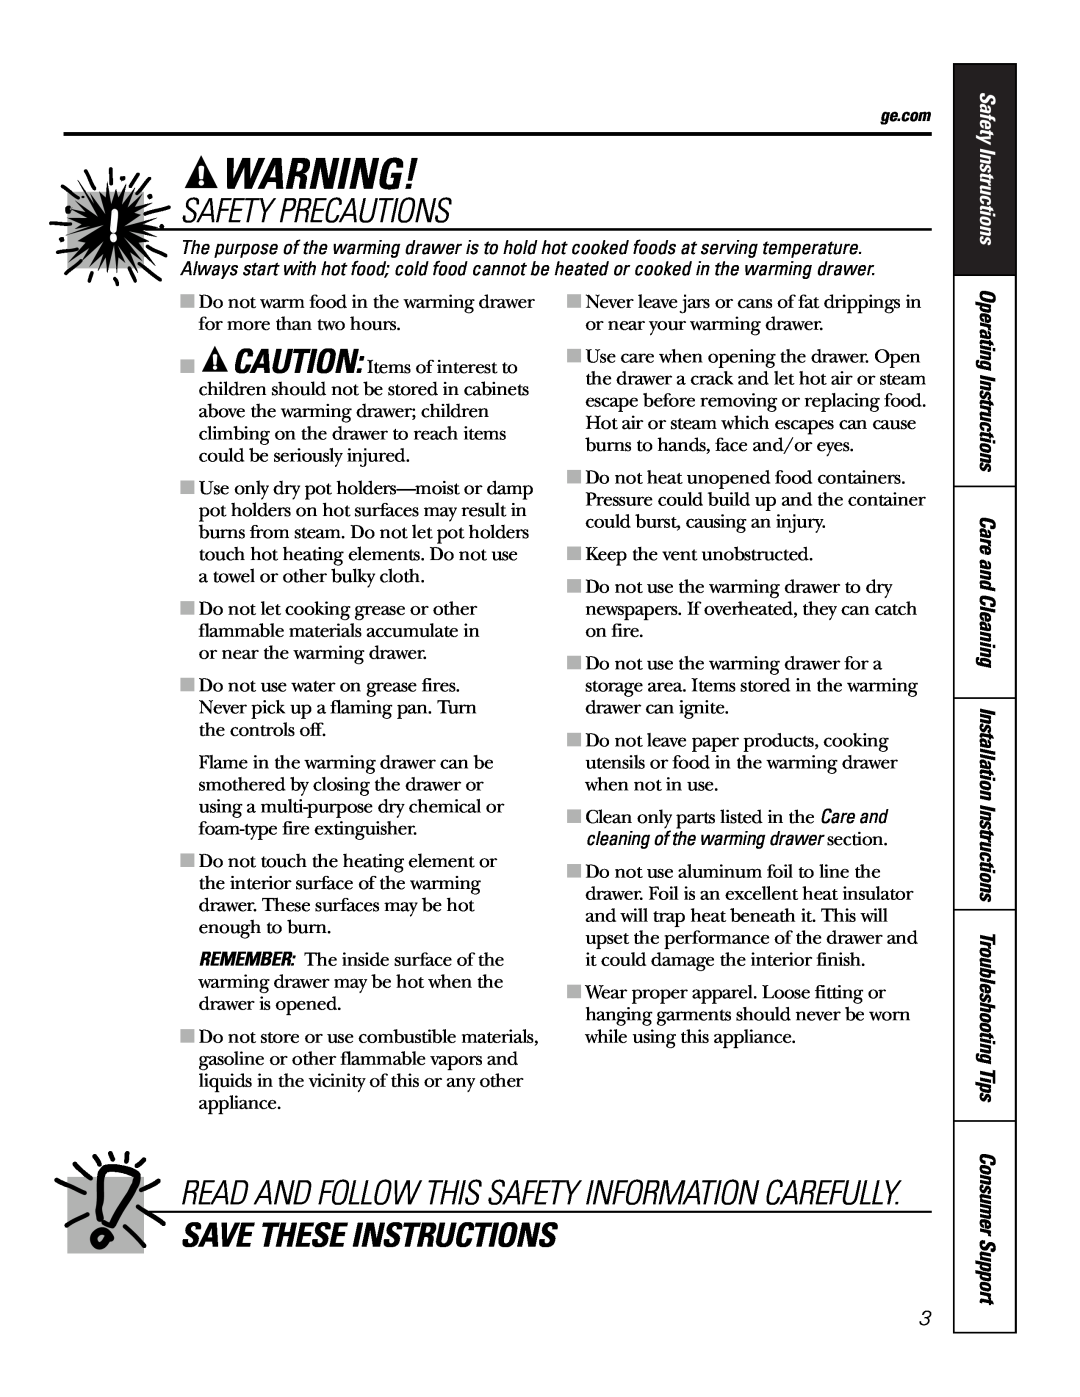 GE JKD915 owner manual Save These Instructions, Safety Instructions, Consumer Support, Safety Precautions 